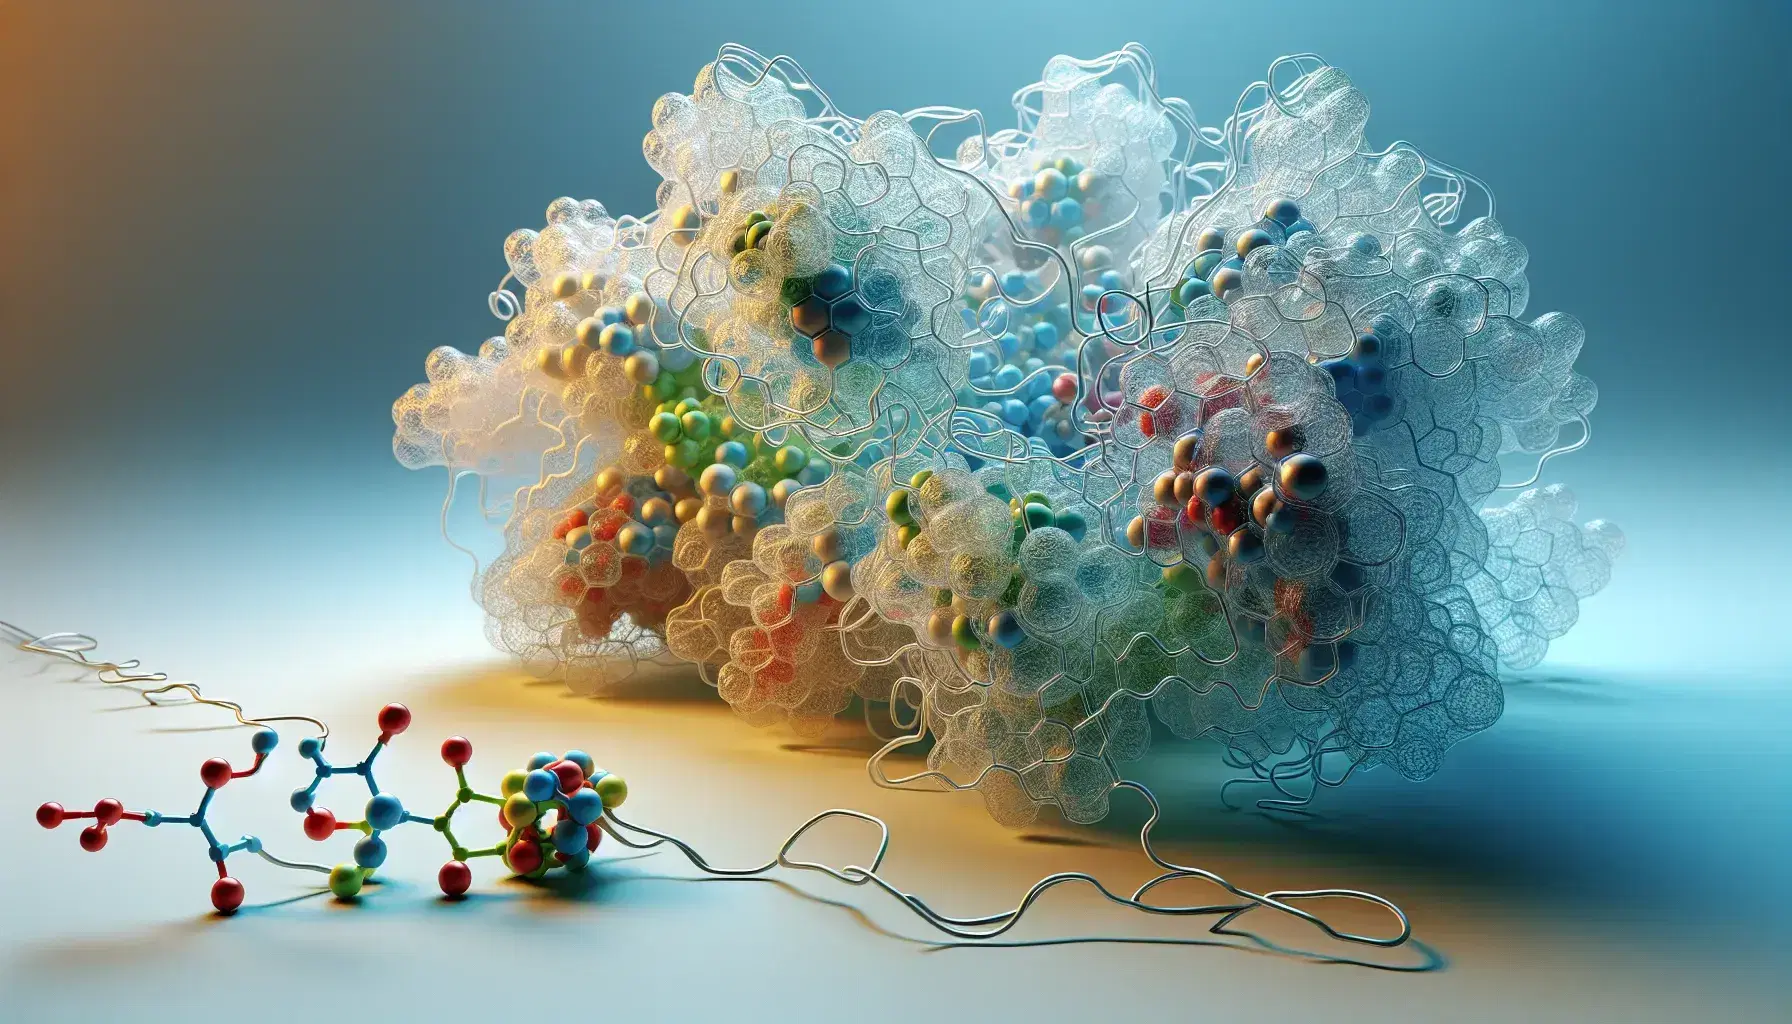 Transparent three-dimensional model of an enzyme with substrate, with colored spheres representing atoms and bonds in a complementary active site.